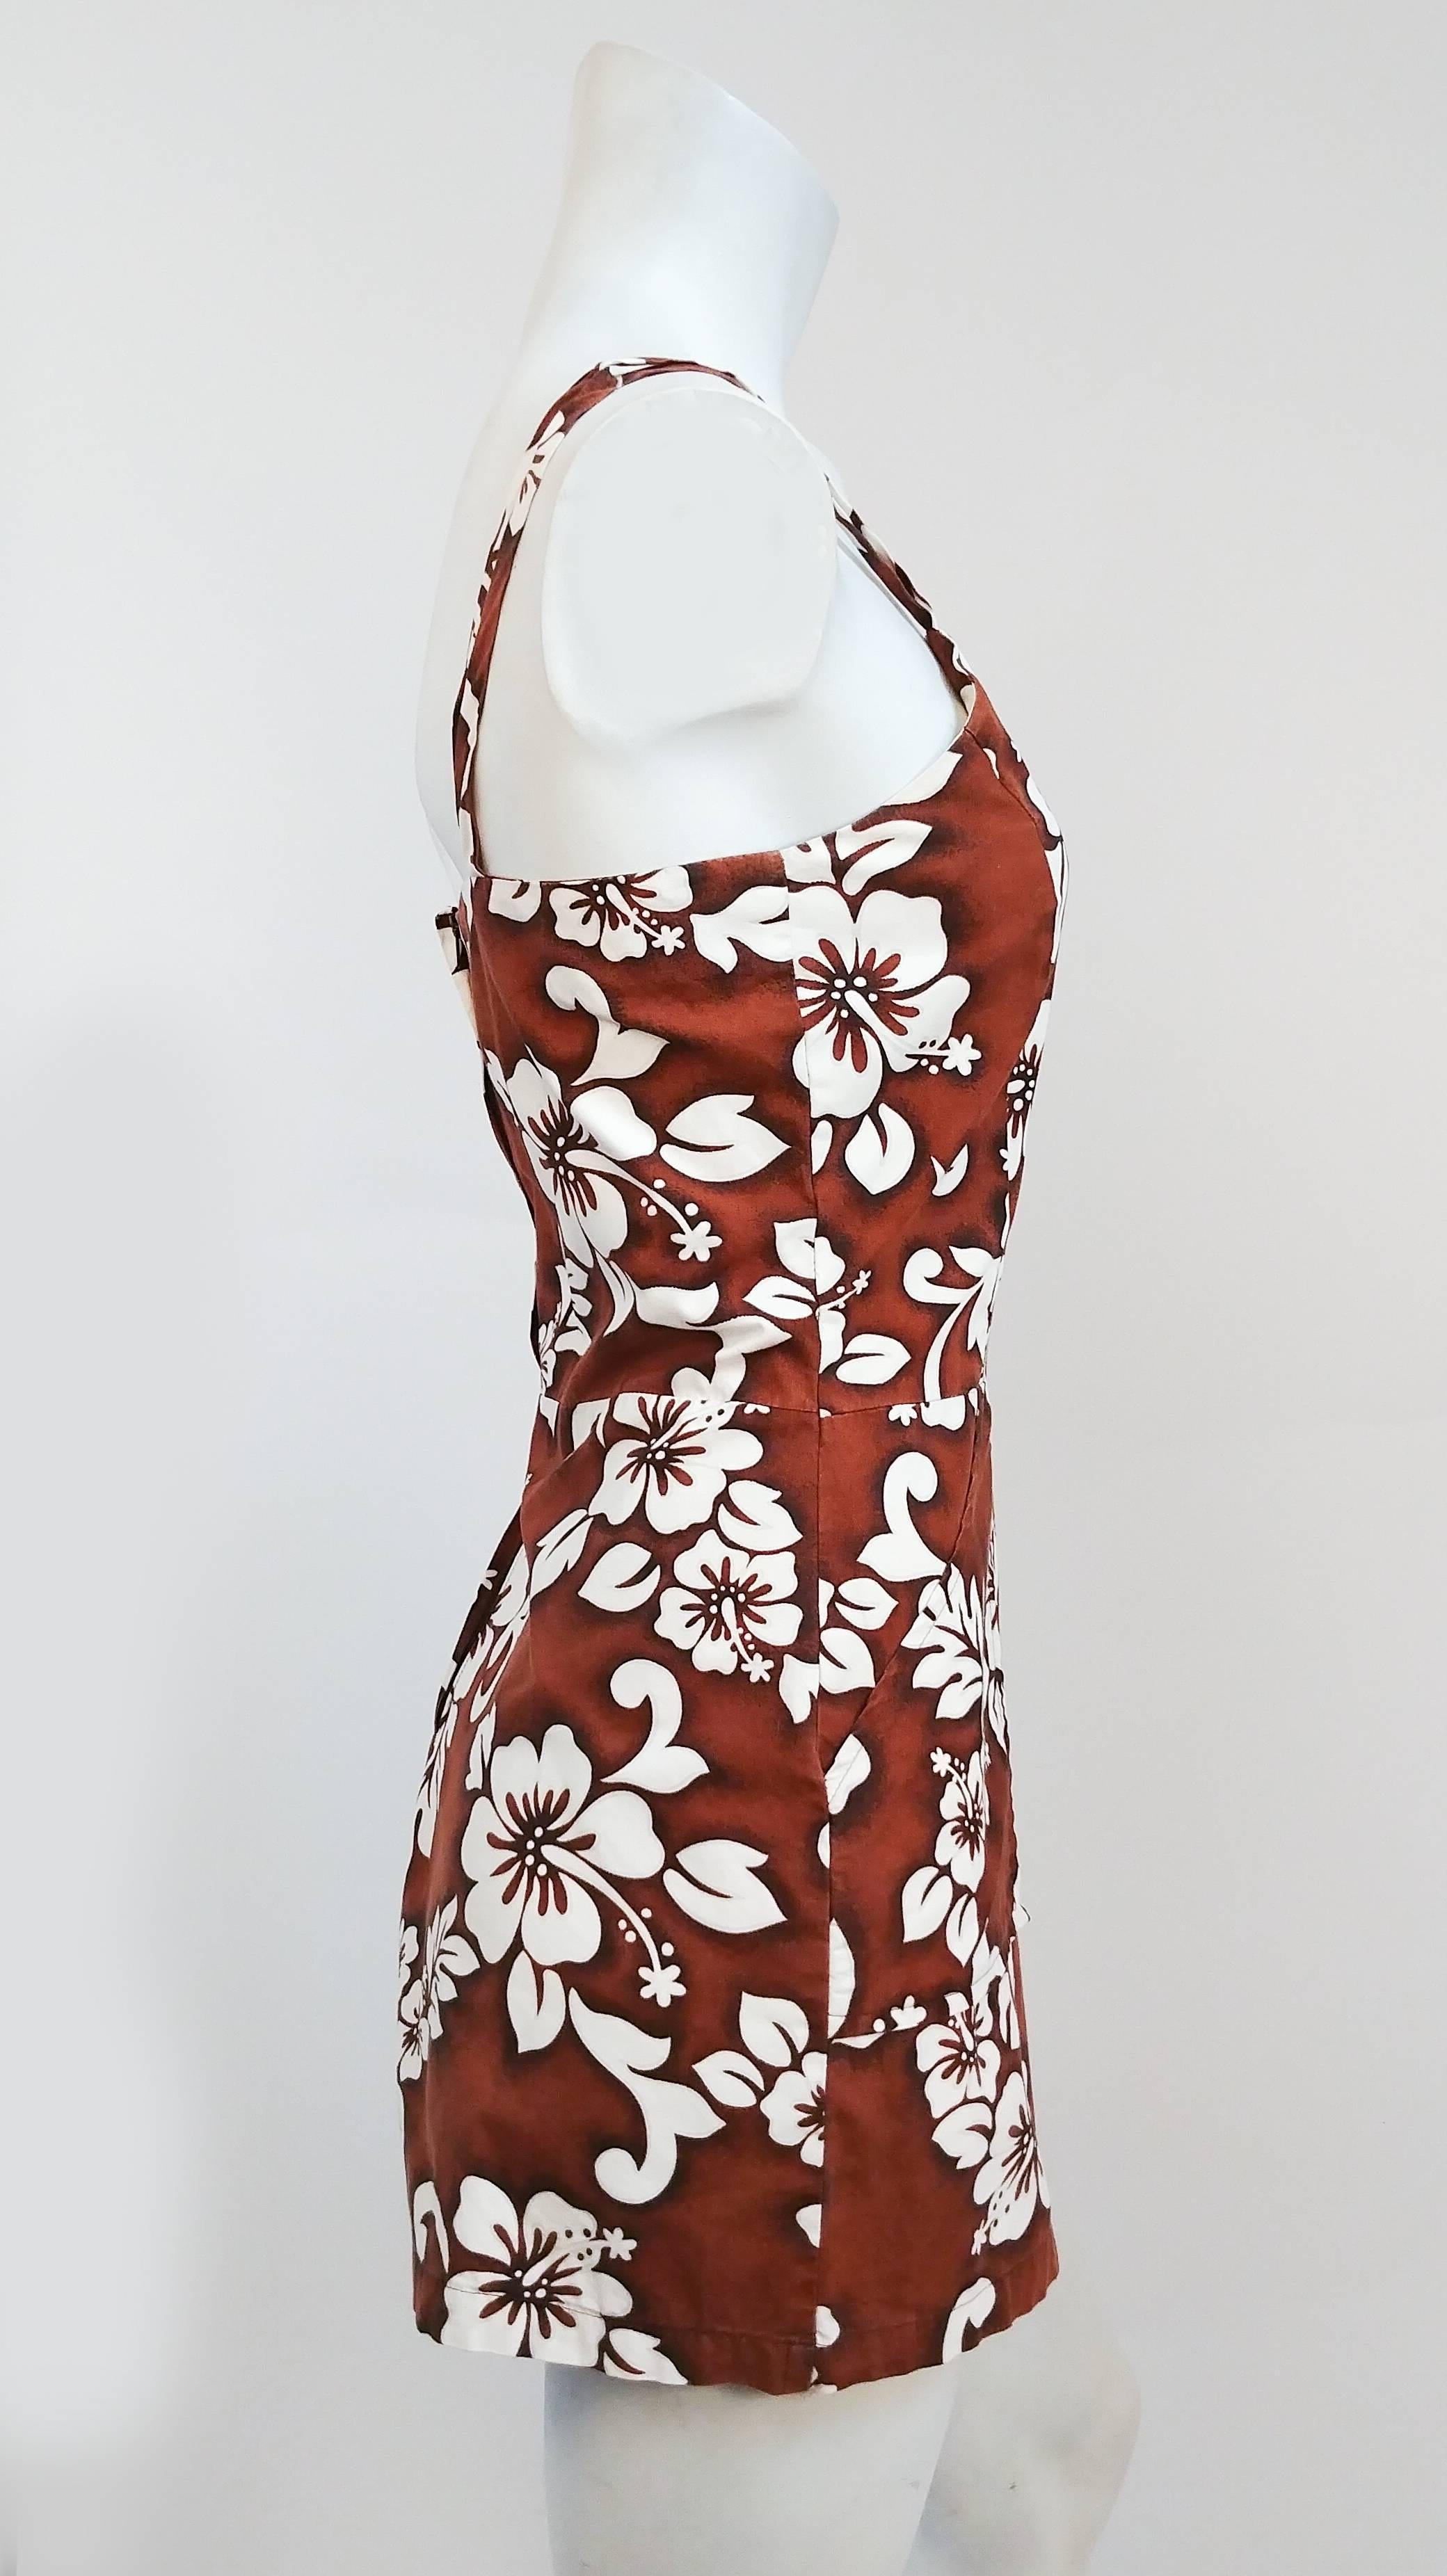 1960s Hawaiian Print Romper. This adorable play suit had spaghetti straps and side pockets. Zips up back. 